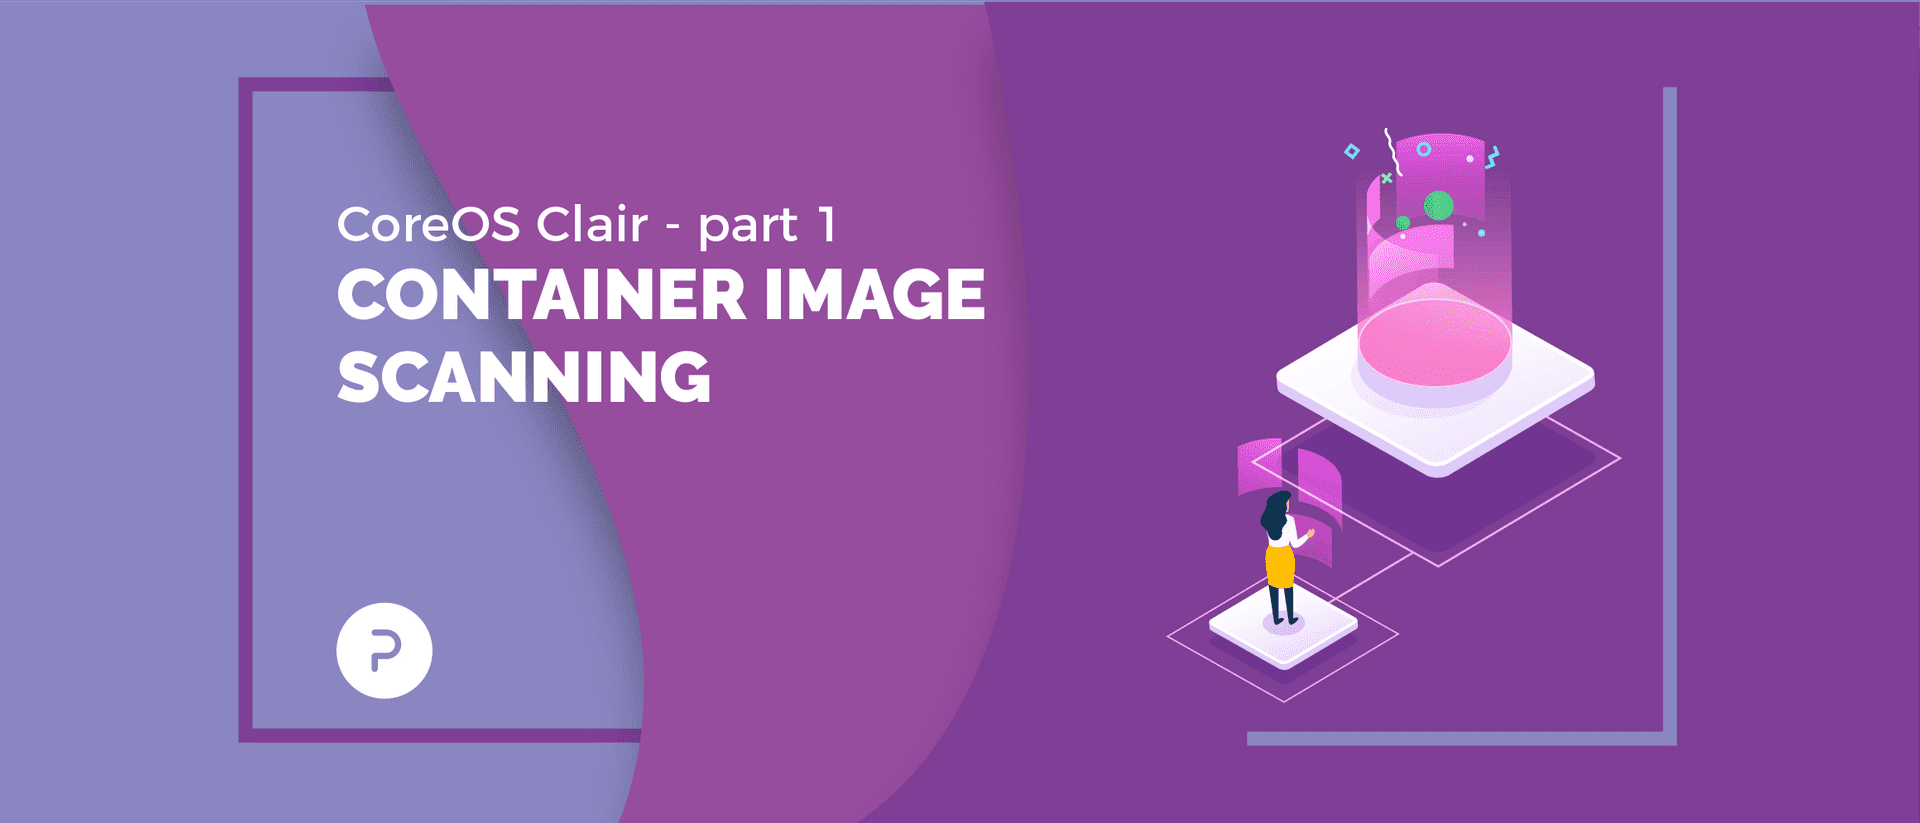 CoreOS Clair - Part 1: Container Image Scanning